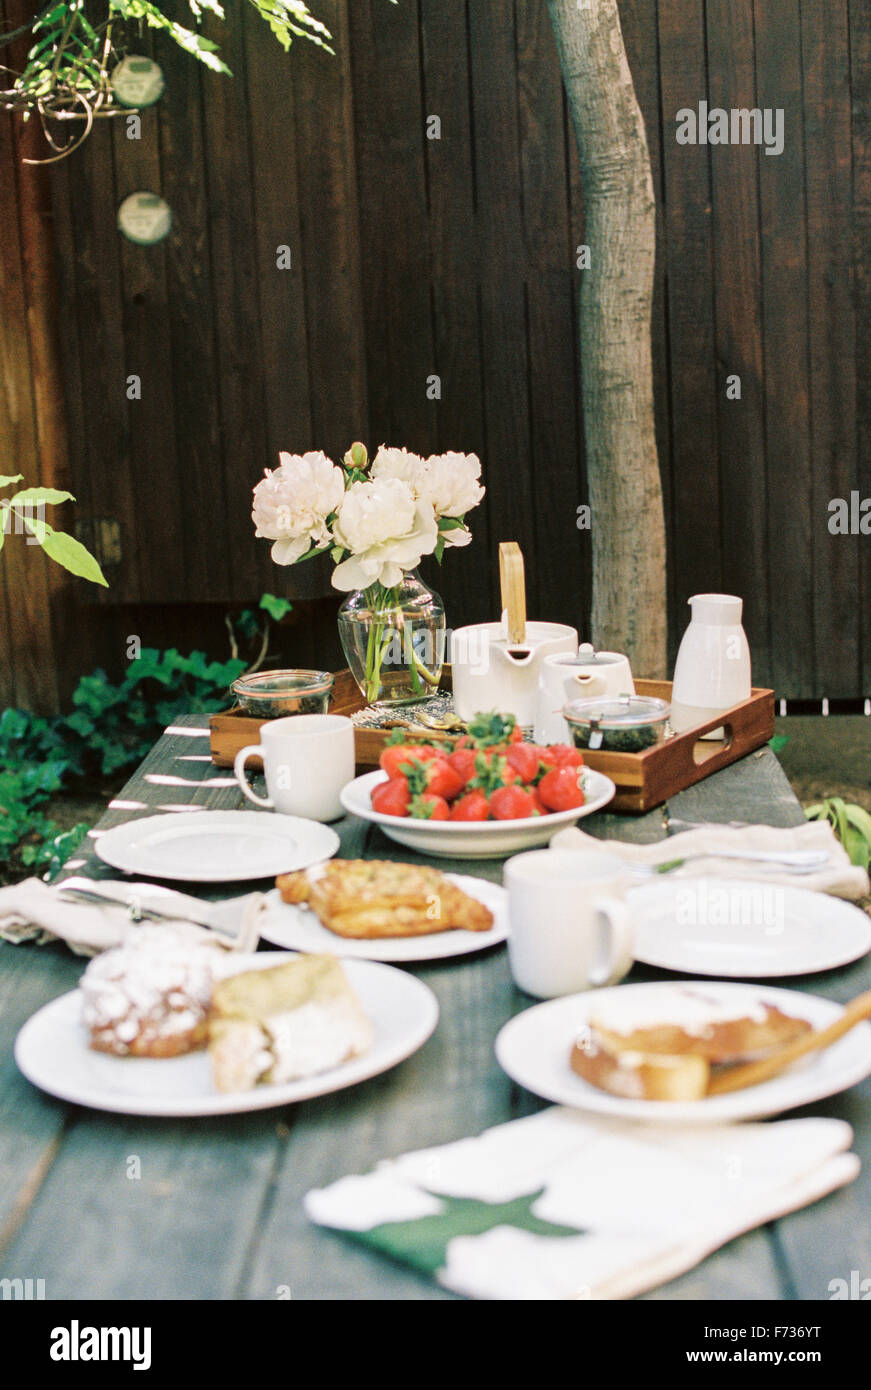 Breakfast table with tea, pastries and fresh strawberries. Stock Photo